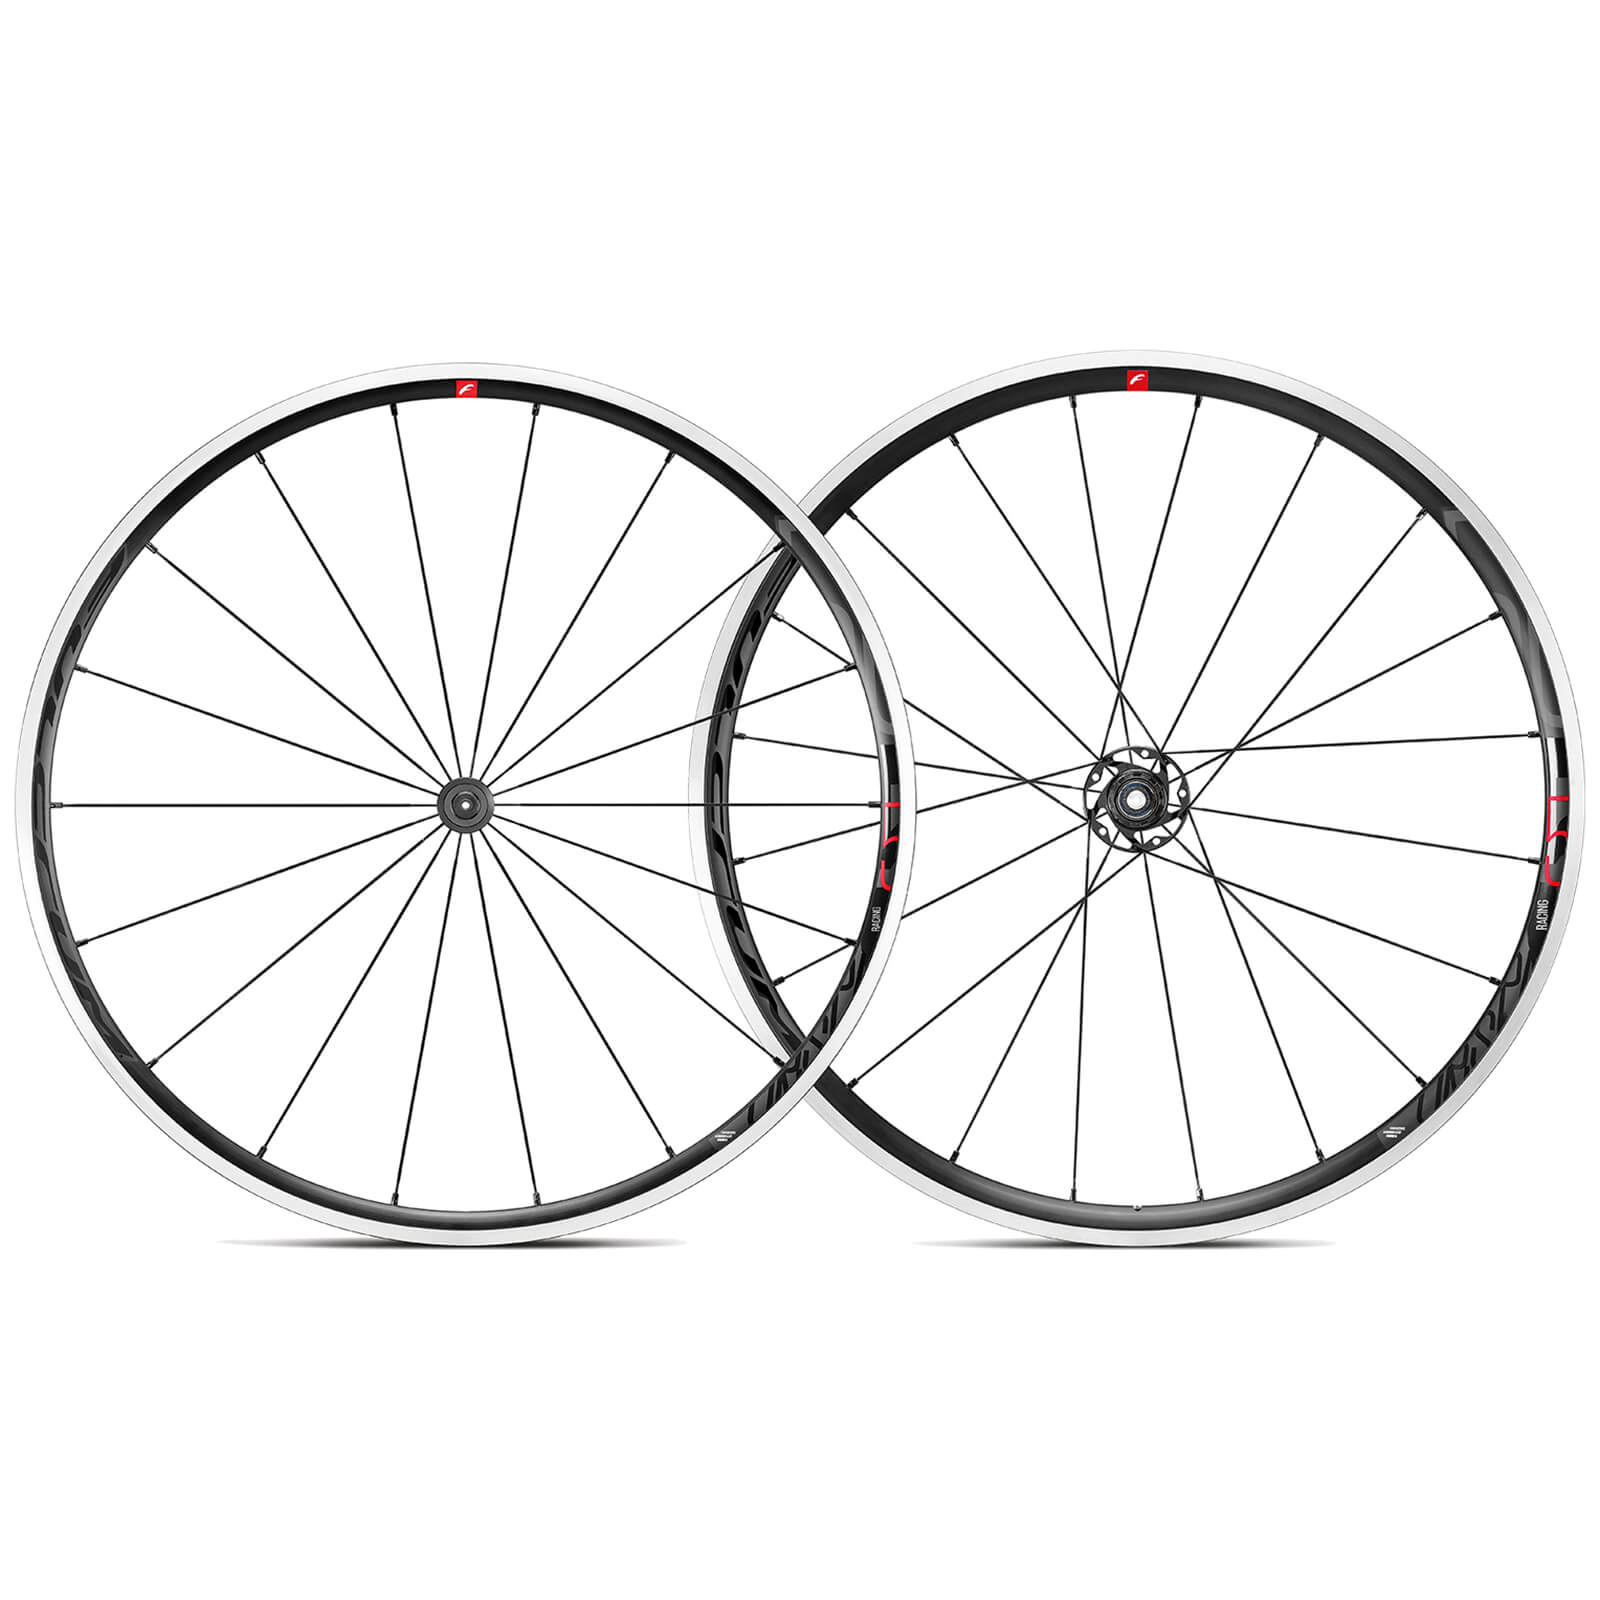 Image of Fulcrum Racing 5 C17 Clincher Road Wheelset - Black / Campagnolo / Pair / 10-11 Speed / Clincher / 700c